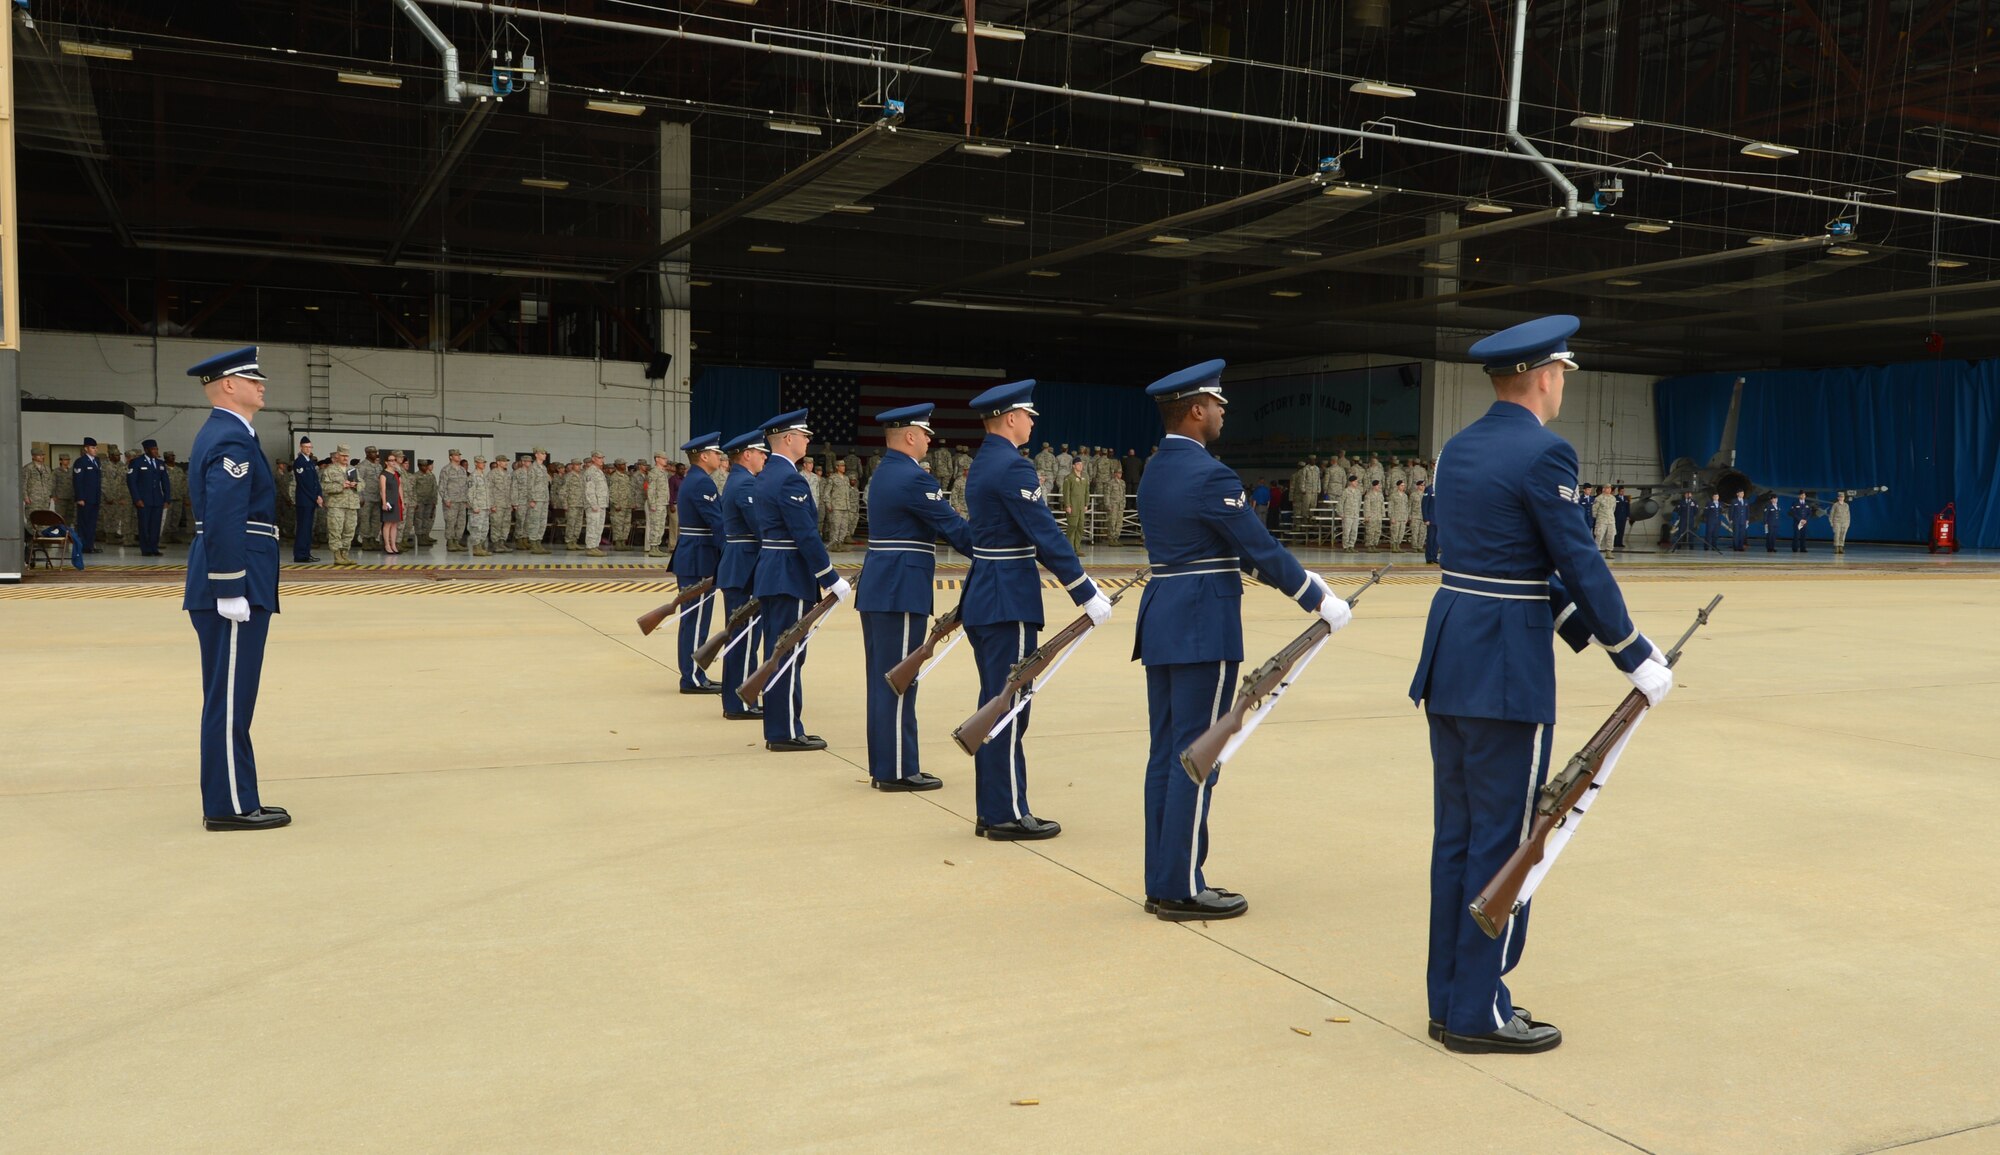 Shaw Air Force Base Honor Guard members perform a 3-volley rifle salute during a memorial held for Capt. James Steel, 77th Fighter Squadron pilot, in Hangar 1200 at Shaw AFB, S.C., April 30, 2013. More than 450 people attended the memorial. Steel passed away when his F-16 Fighting Falcon crashed in Afghanistan April 3, 2013. (U.S. Air Force photo by Senior Airman Tabatha Zarrella/Released)
